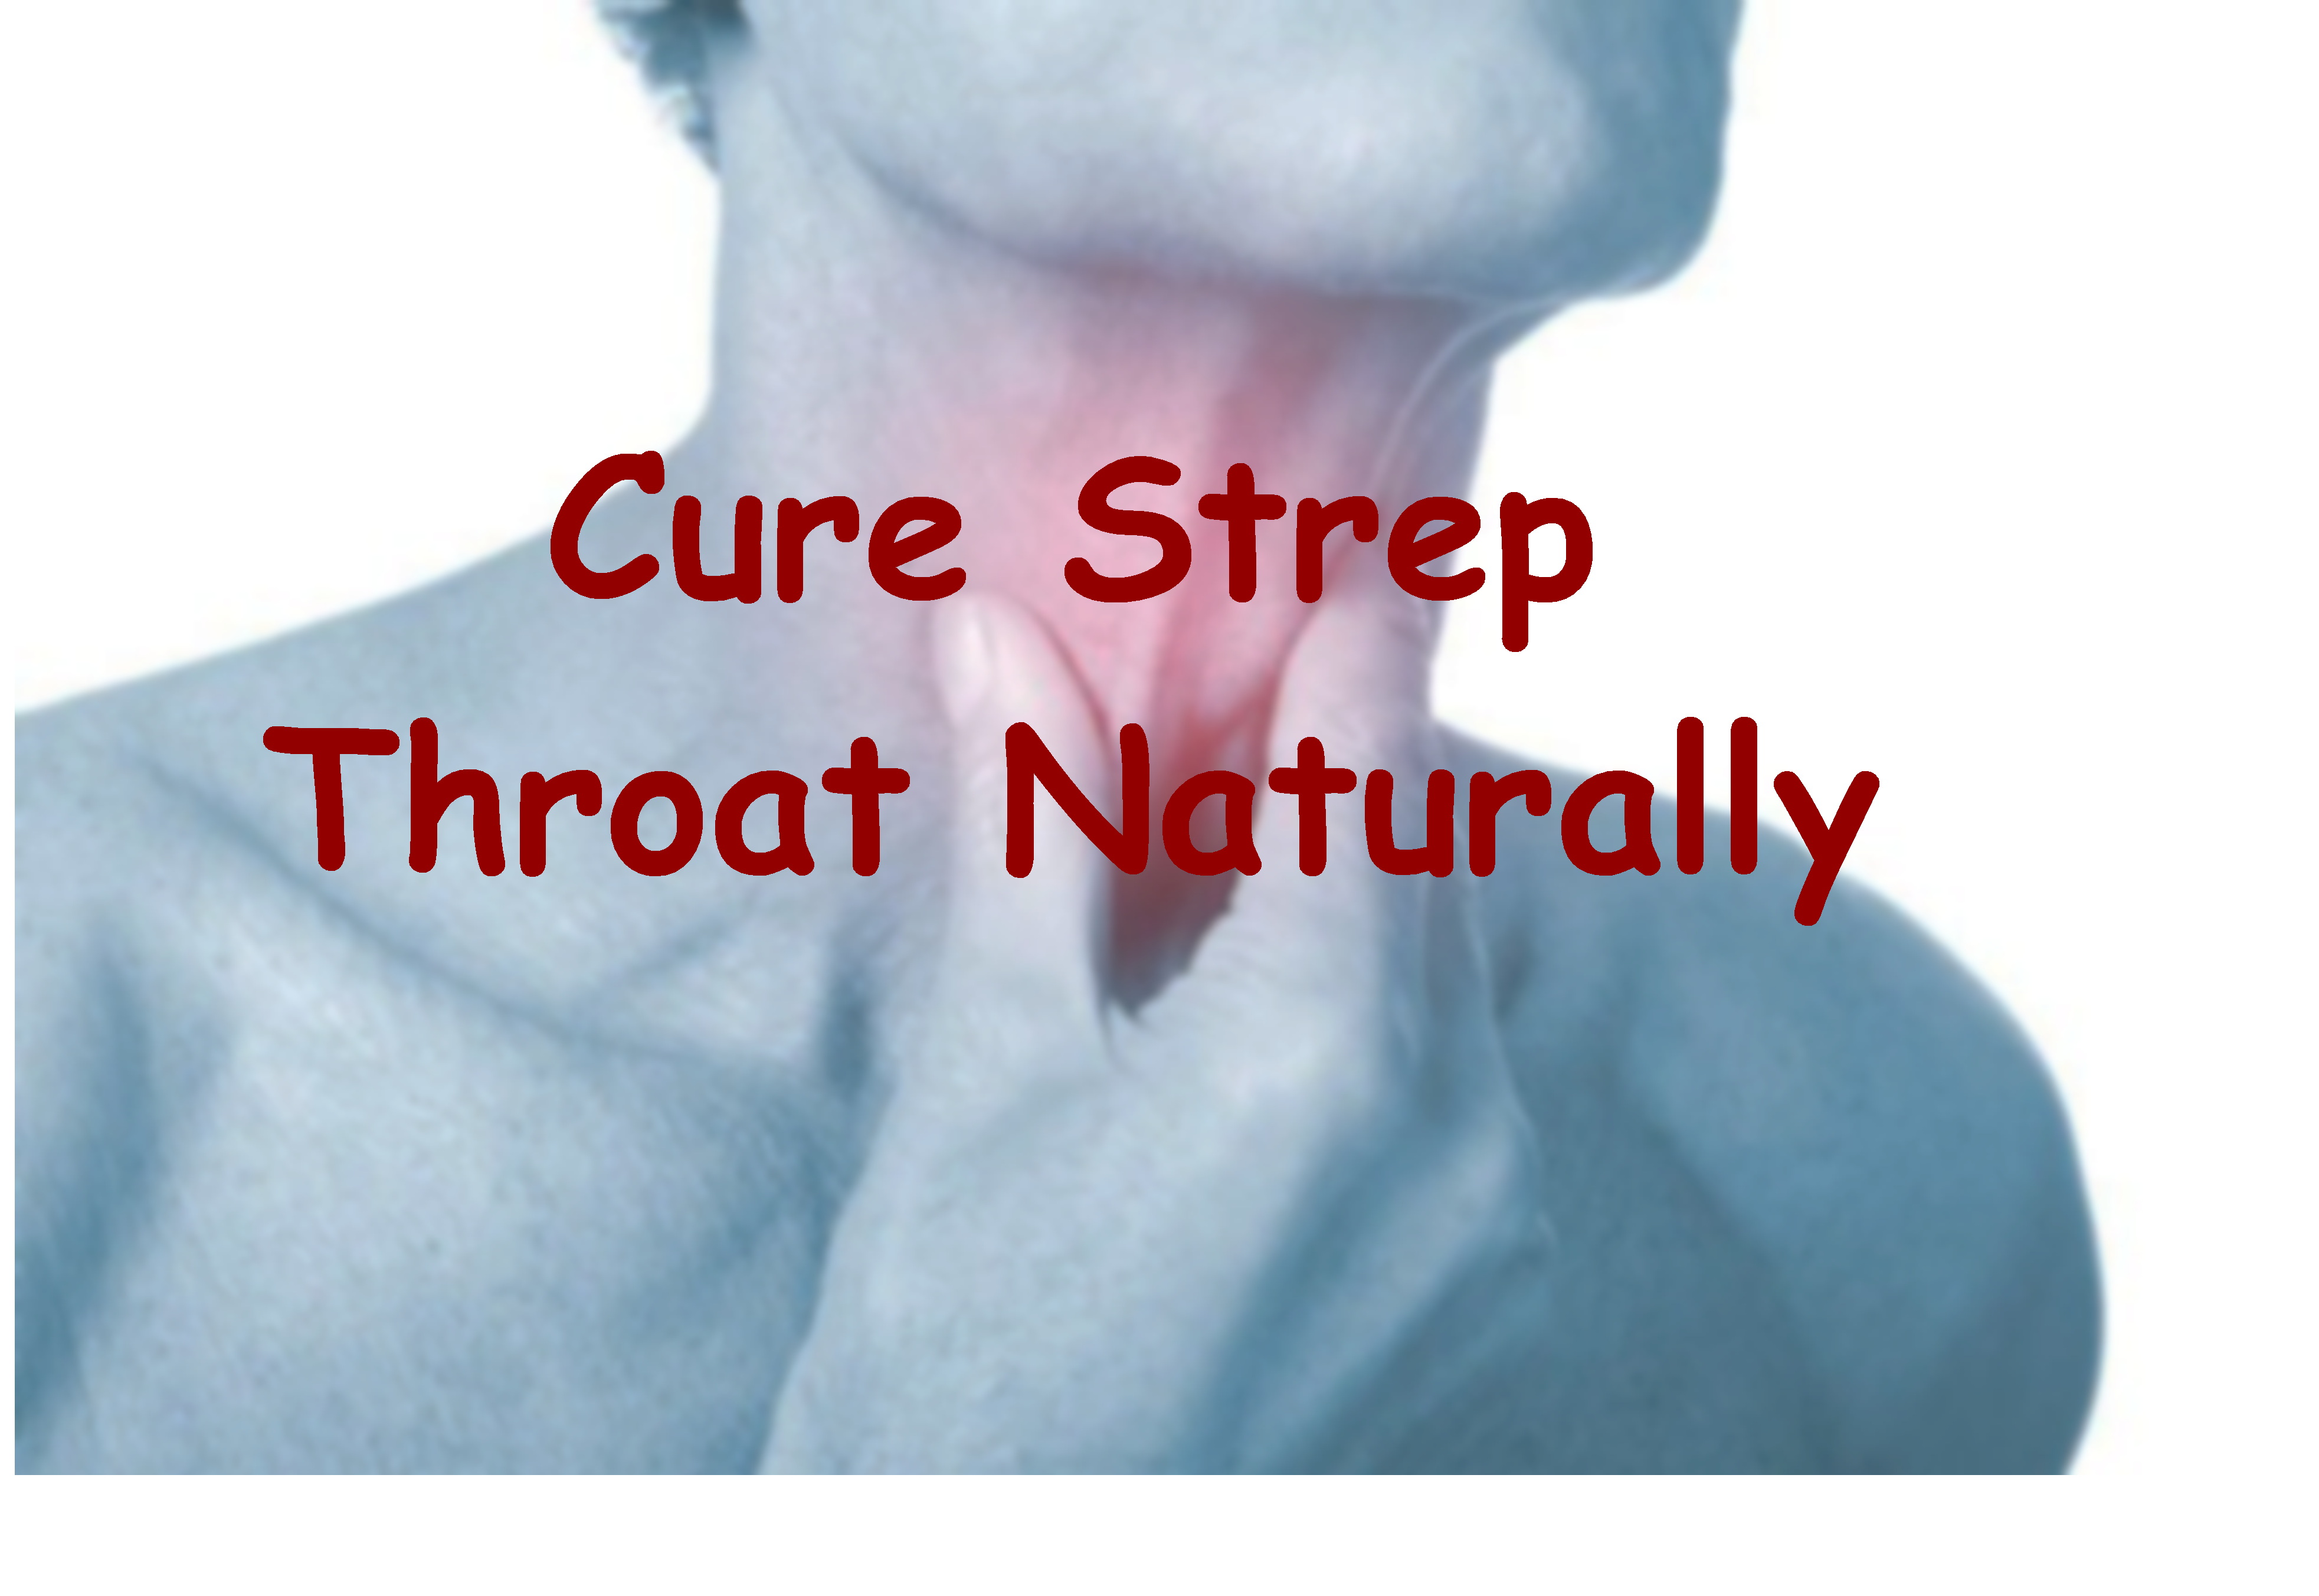 Cure Strep Throat Naturally